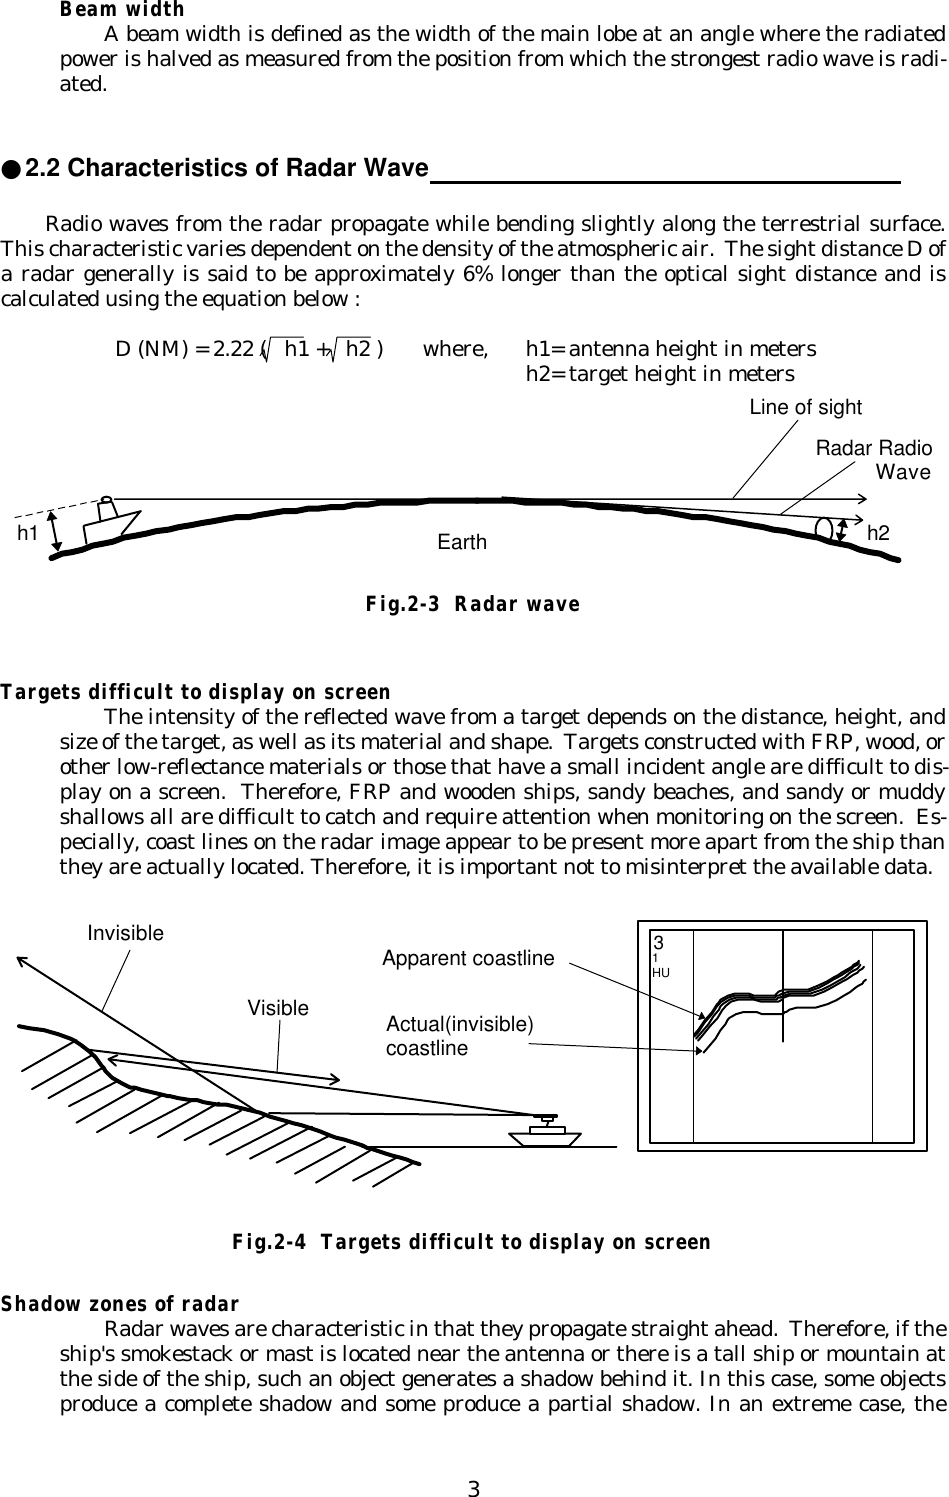 3Beam widthA beam width is defined as the width of the main lobe at an angle where the radiatedpower is halved as measured from the position from which the strongest radio wave is radi-ated.●2.2 Characteristics of Radar Wave                                                               Radio waves from the radar propagate while bending slightly along the terrestrial surface.This characteristic varies dependent on the density of the atmospheric air.  The sight distance D ofa radar generally is said to be approximately 6% longer than the optical sight distance and iscalculated using the equation below :     D (NM) = 2.22 (   h1 +   h2 ) where, h1= antenna height in metersh2= target height in metersFig.2-3  Radar waveTargets difficult to display on screenThe intensity of the reflected wave from a target depends on the distance, height, andsize of the target, as well as its material and shape.  Targets constructed with FRP, wood, orother low-reflectance materials or those that have a small incident angle are difficult to dis-play on a screen.  Therefore, FRP and wooden ships, sandy beaches, and sandy or muddyshallows all are difficult to catch and require attention when monitoring on the screen.  Es-pecially, coast lines on the radar image appear to be present more apart from the ship thanthey are actually located. Therefore, it is important not to misinterpret the available data.Shadow zones of radarRadar waves are characteristic in that they propagate straight ahead.  Therefore, if theship&apos;s smokestack or mast is located near the antenna or there is a tall ship or mountain atthe side of the ship, such an object generates a shadow behind it. In this case, some objectsproduce a complete shadow and some produce a partial shadow. In an extreme case, theApparent coastlineActual(invisible)coastlineInvisibleVisible31HUFig.2-4  Targets difficult to display on screenh1 h2Line of sightRadar Radio          WaveEarth